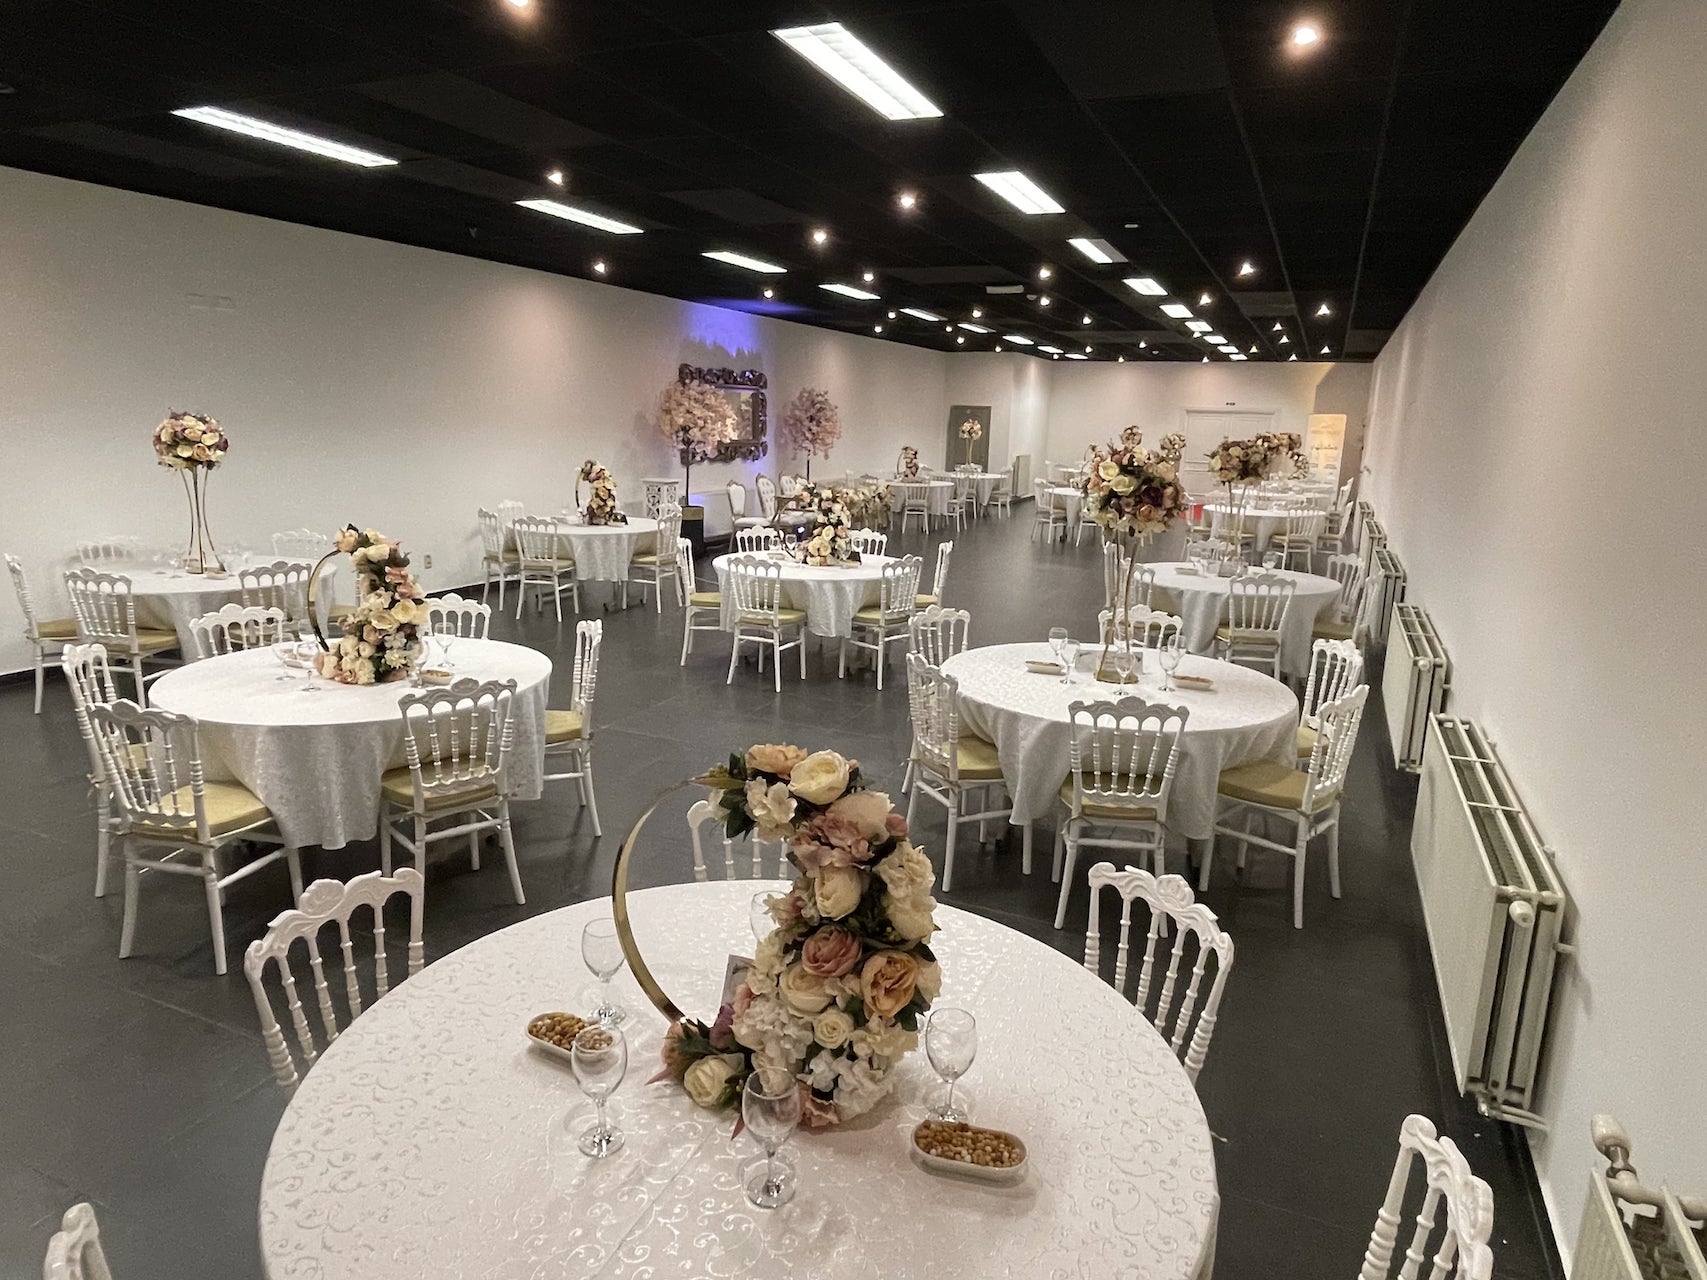 Looking for a compact event venue?
Discover Mini Max by Maxim Palace!
